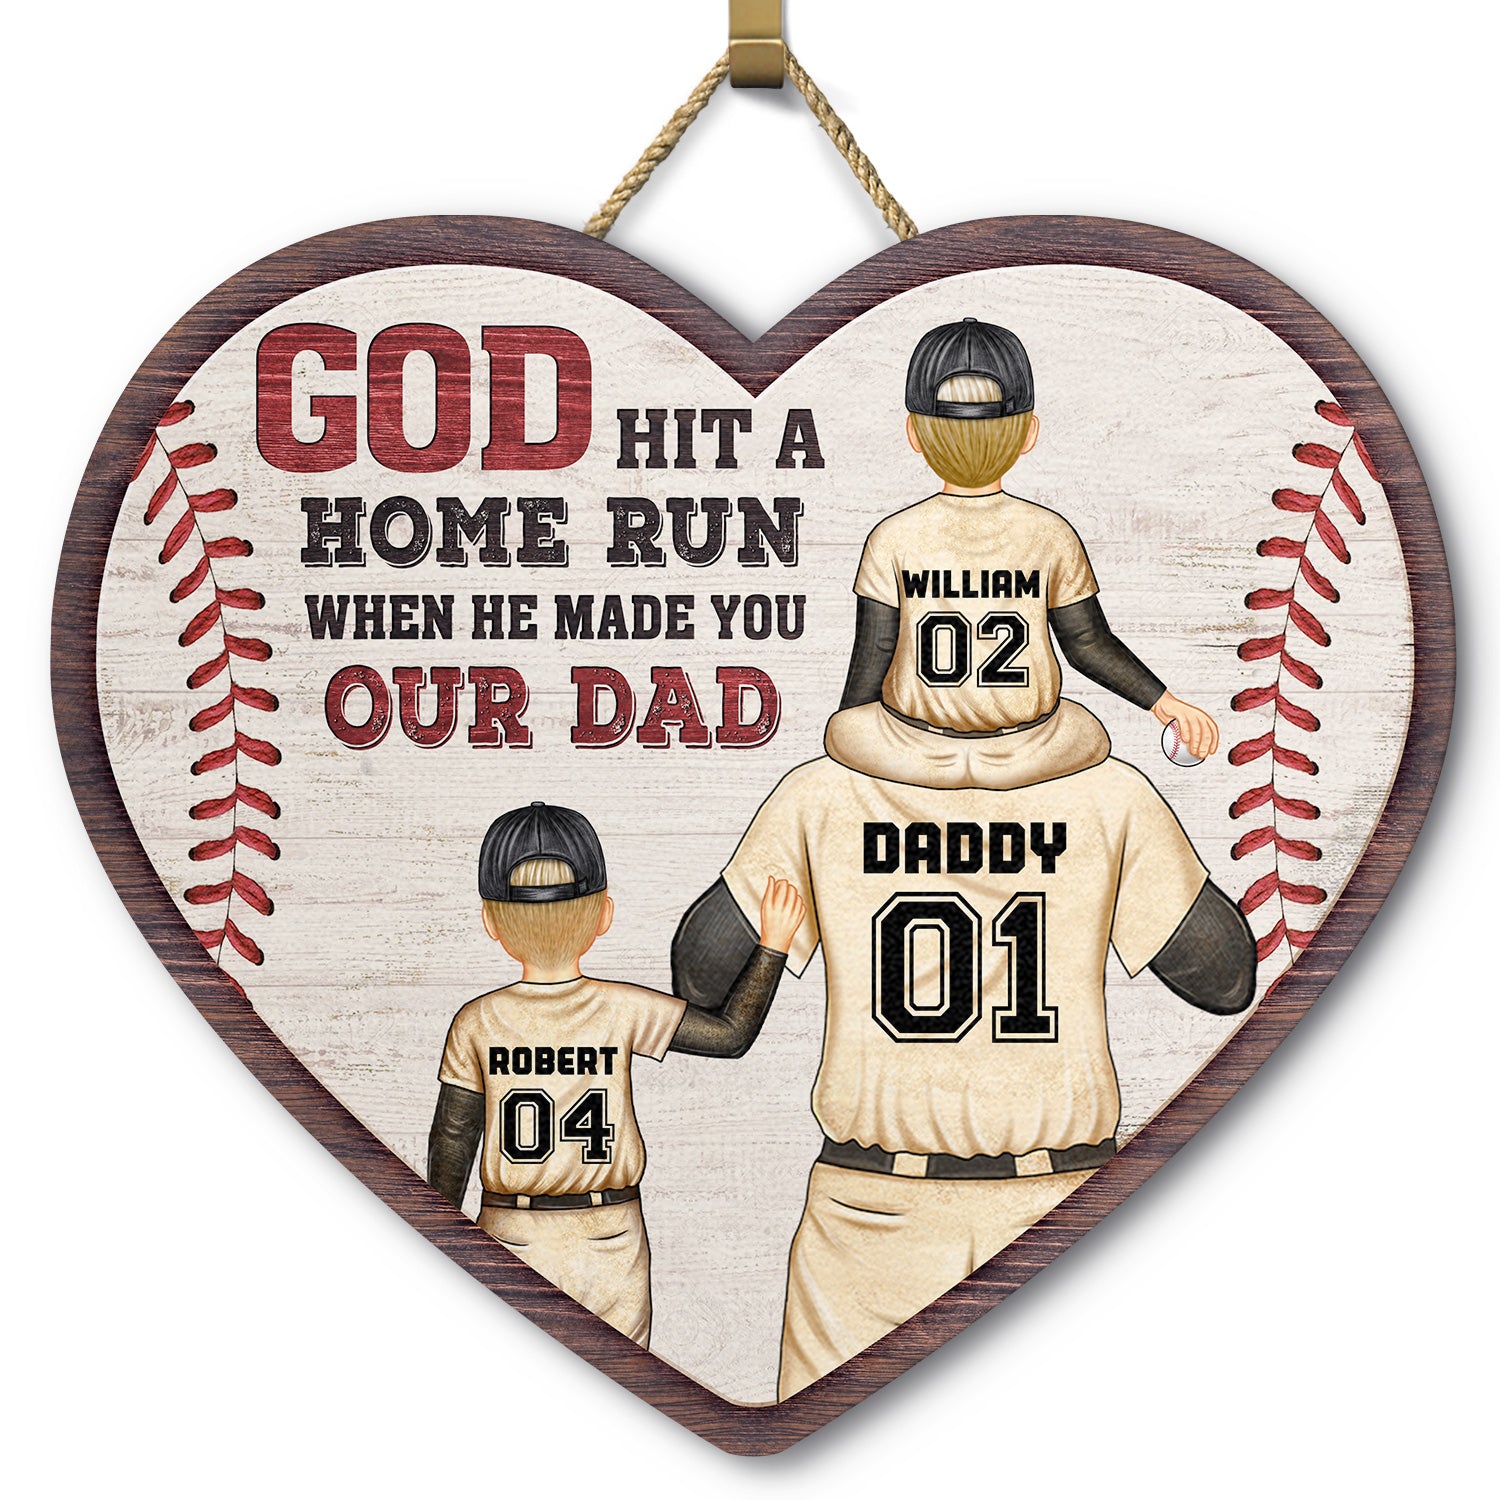 God Hit A Homerun When He Made You Our Dad - Gift For Dad, Father, Baseball, Softball Fans - Personalize Custom Shaped Wood Sign